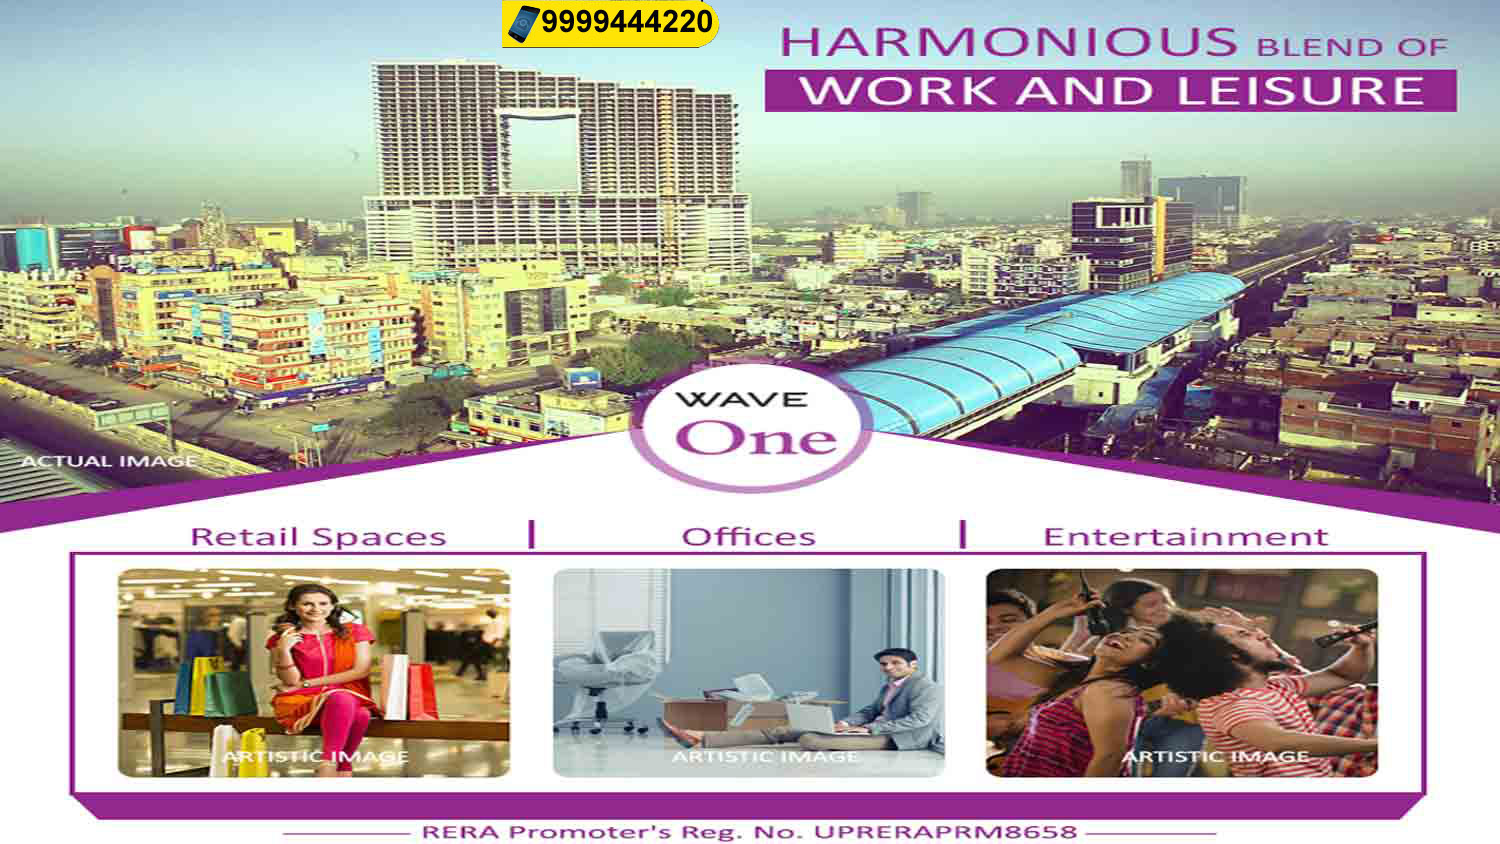 Wave One Noida is a Commercial Development & High-Rise that Creates